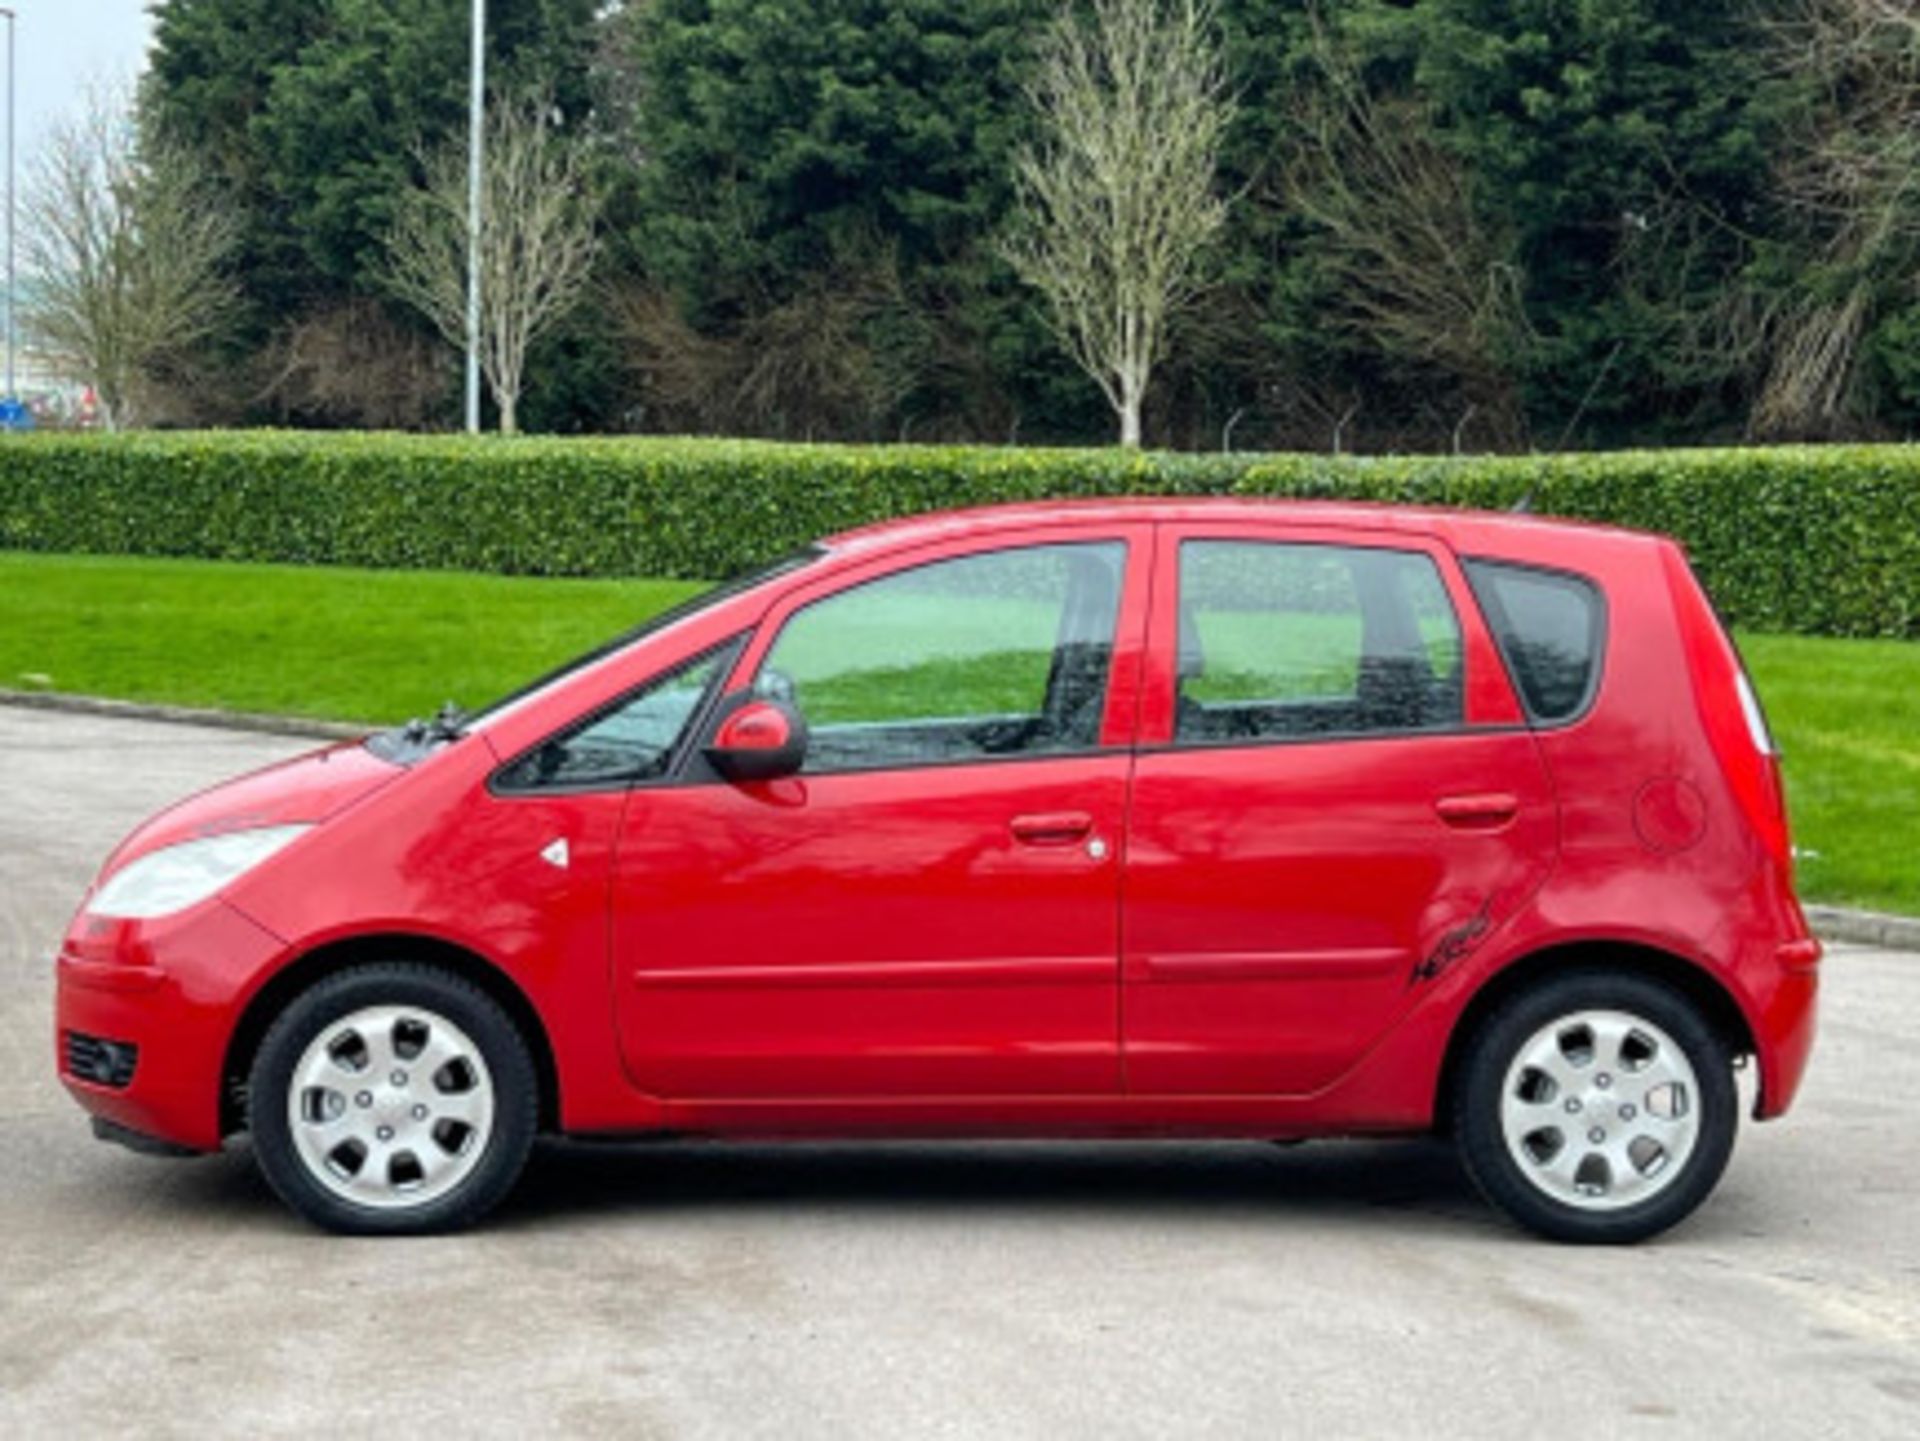 2007 MITSUBISHI COLT 1.5 DI-D DIESEL AUTOMATIC >>--NO VAT ON HAMMER--<< - Image 2 of 127